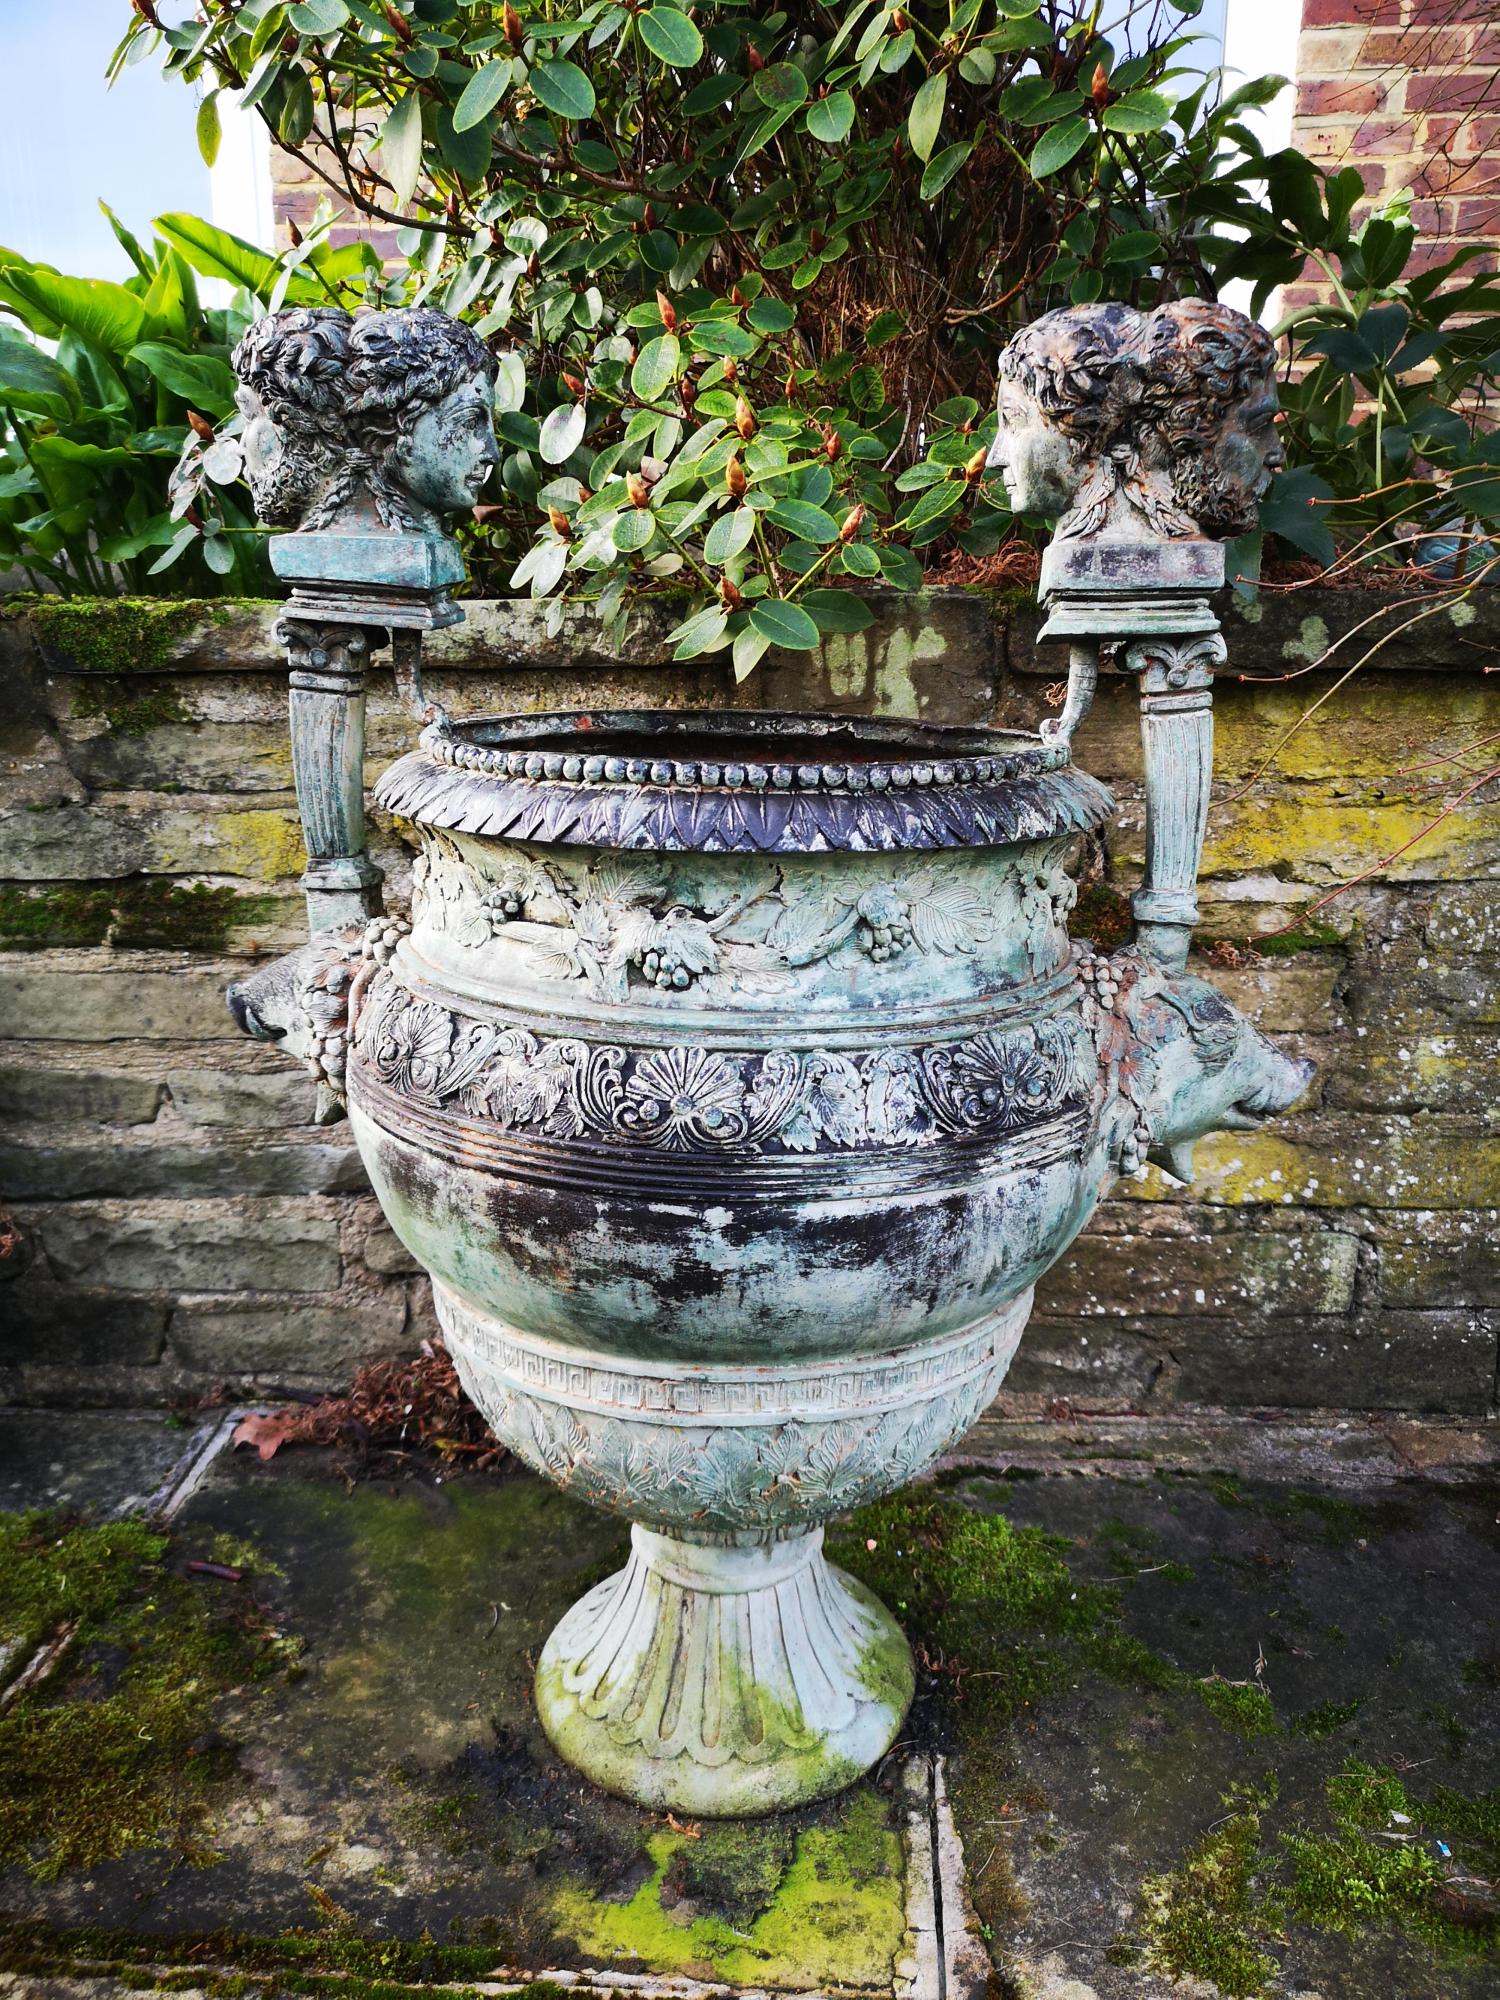 Garden urns/pots/planters: A similar pair of bronze urns Provenance: From a private garden